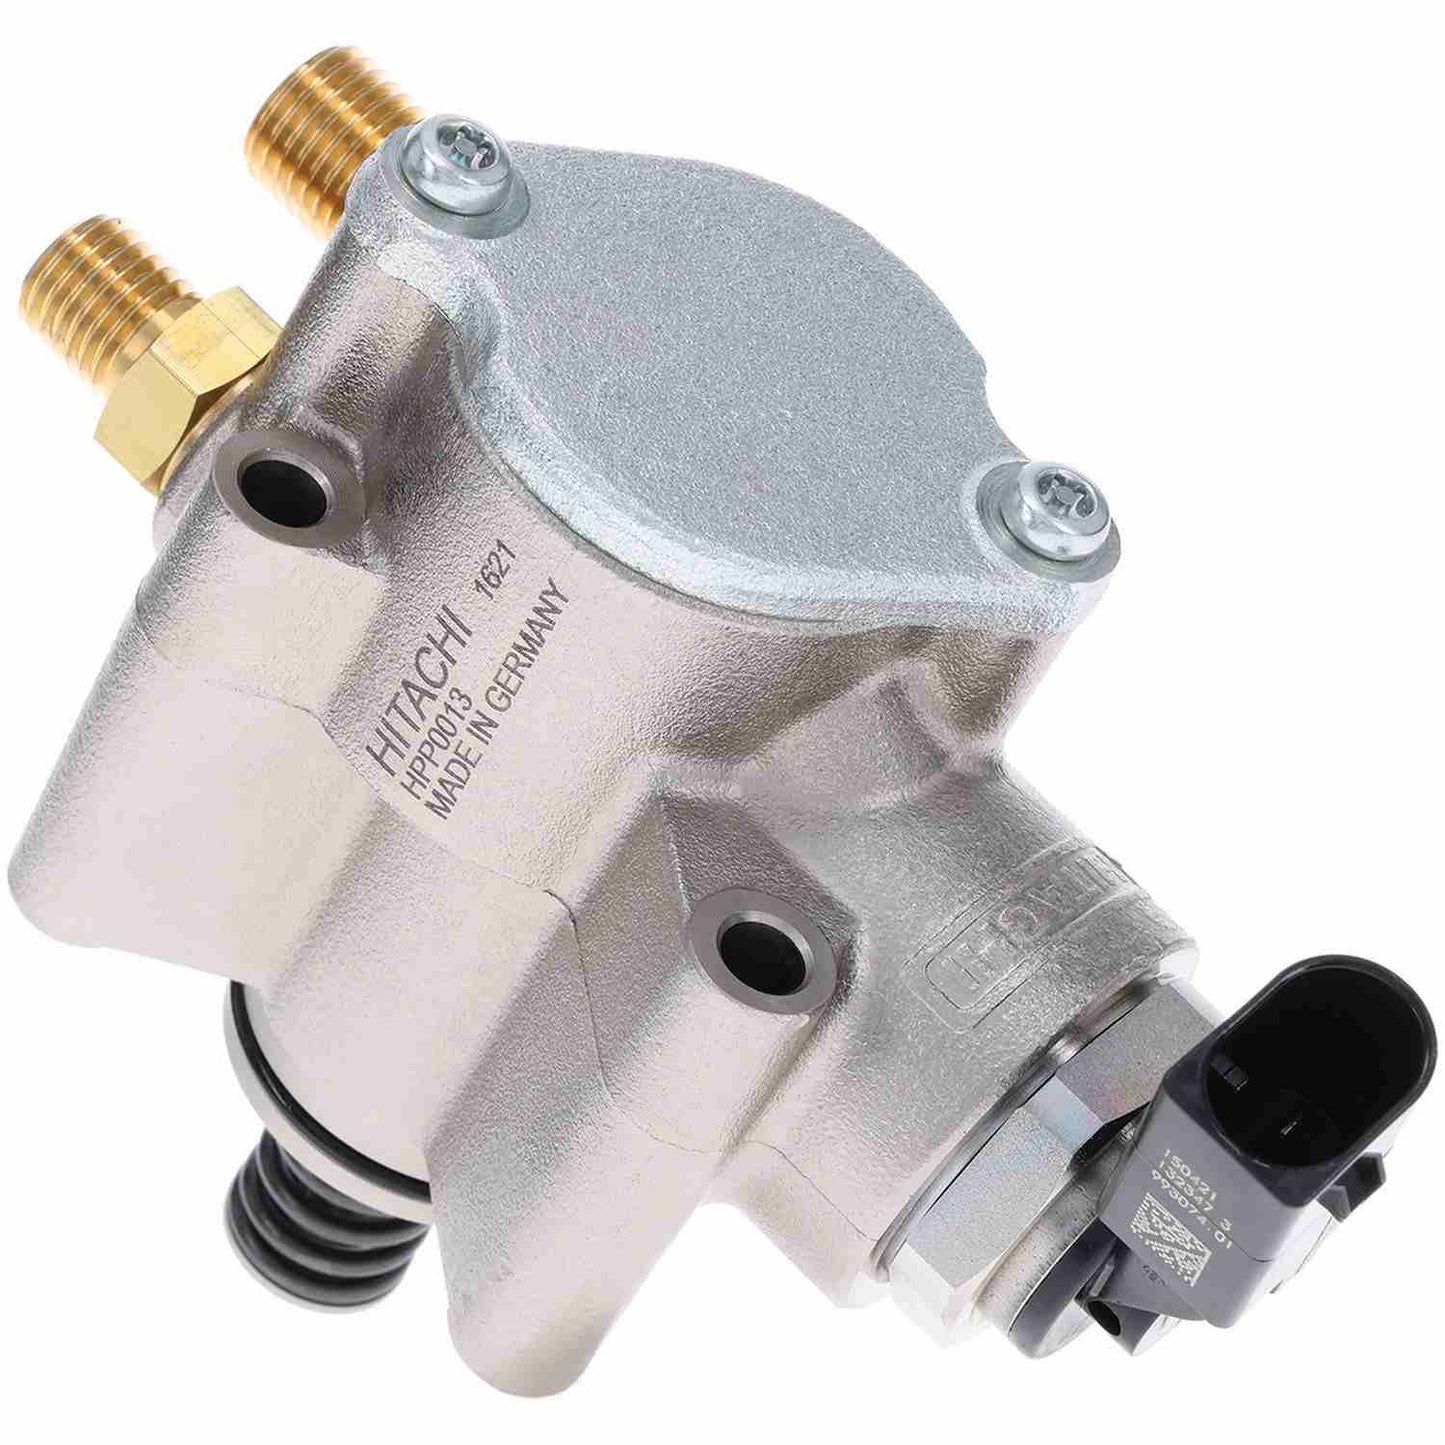 Connector View of Direct Injection High Pressure Fuel Pump HITACHI HPP0013